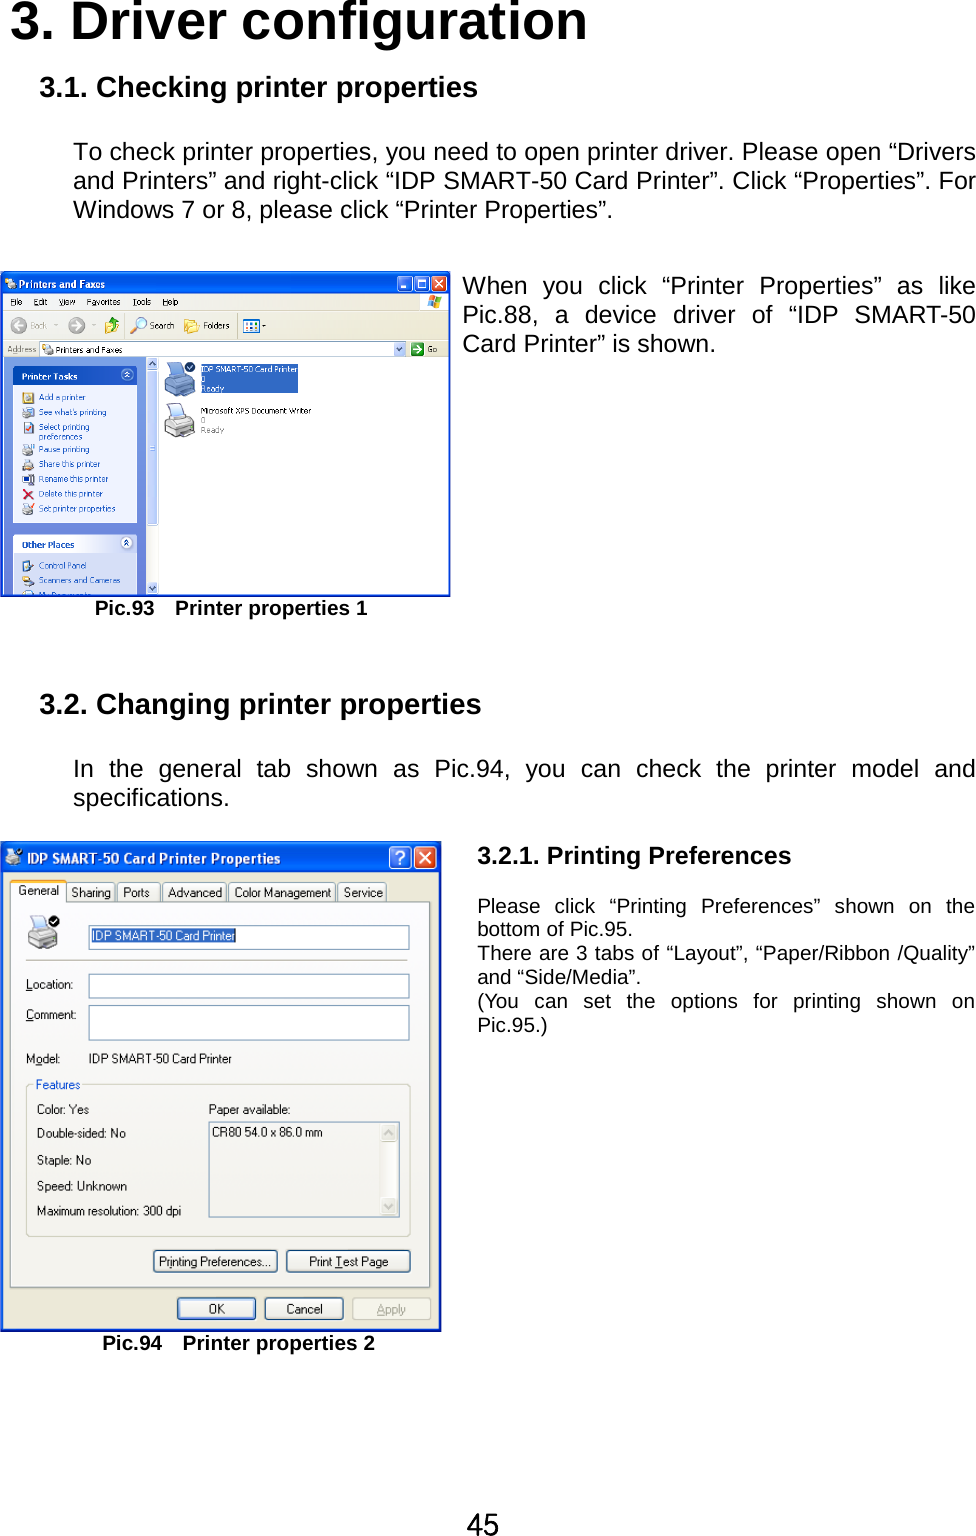 [\3. Driver configuration3.1. Checking printer propertiesTo check printer properties, you need to open printer driver. Please open “Driversand Printers” and right-click “IDP SMART-50 Card Printer”. Click “Properties”. ForWindows 7 or 8, please click “Printer Properties”.Pic.93 Printer properties 1When you click “Printer Properties” as likePic.88, a device driver of “IDP SMART-50Card Printer” is shown.3.2. Changing printer propertiesIn the general tab shown as Pic.94, you can check the printer model andspecifications.Pic.94 Printer properties 23.2.1. Printing PreferencesPlease click “Printing Preferences” shown on thebottom of Pic.95.There are 3 tabs of “Layout”, “Paper/Ribbon /Quality”and “Side/Media”.(You can set the options for printing shown onPic.95.)